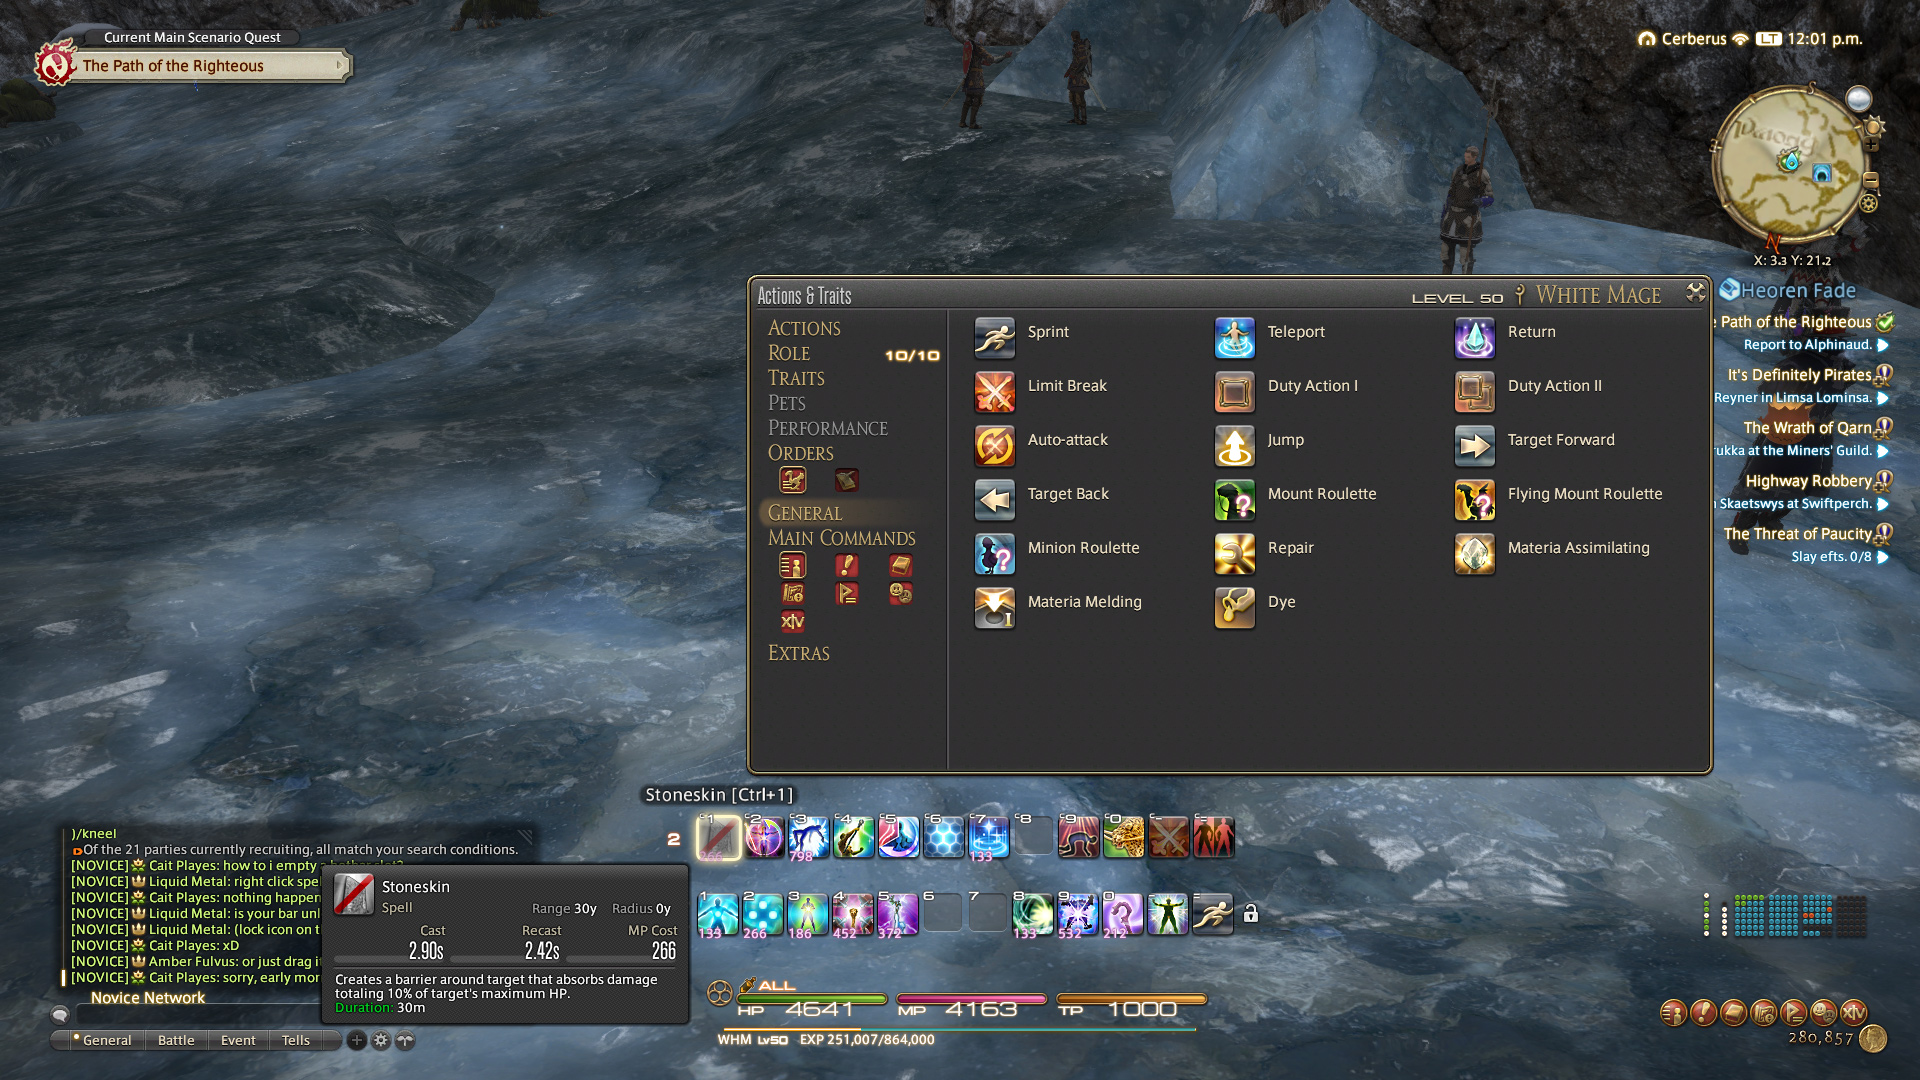 Final Fantasy Xiv Returning To Eorzea 6 Years Later The Ups And Downs Of Mmorpgs Lh Yeung Net Blog Anigames